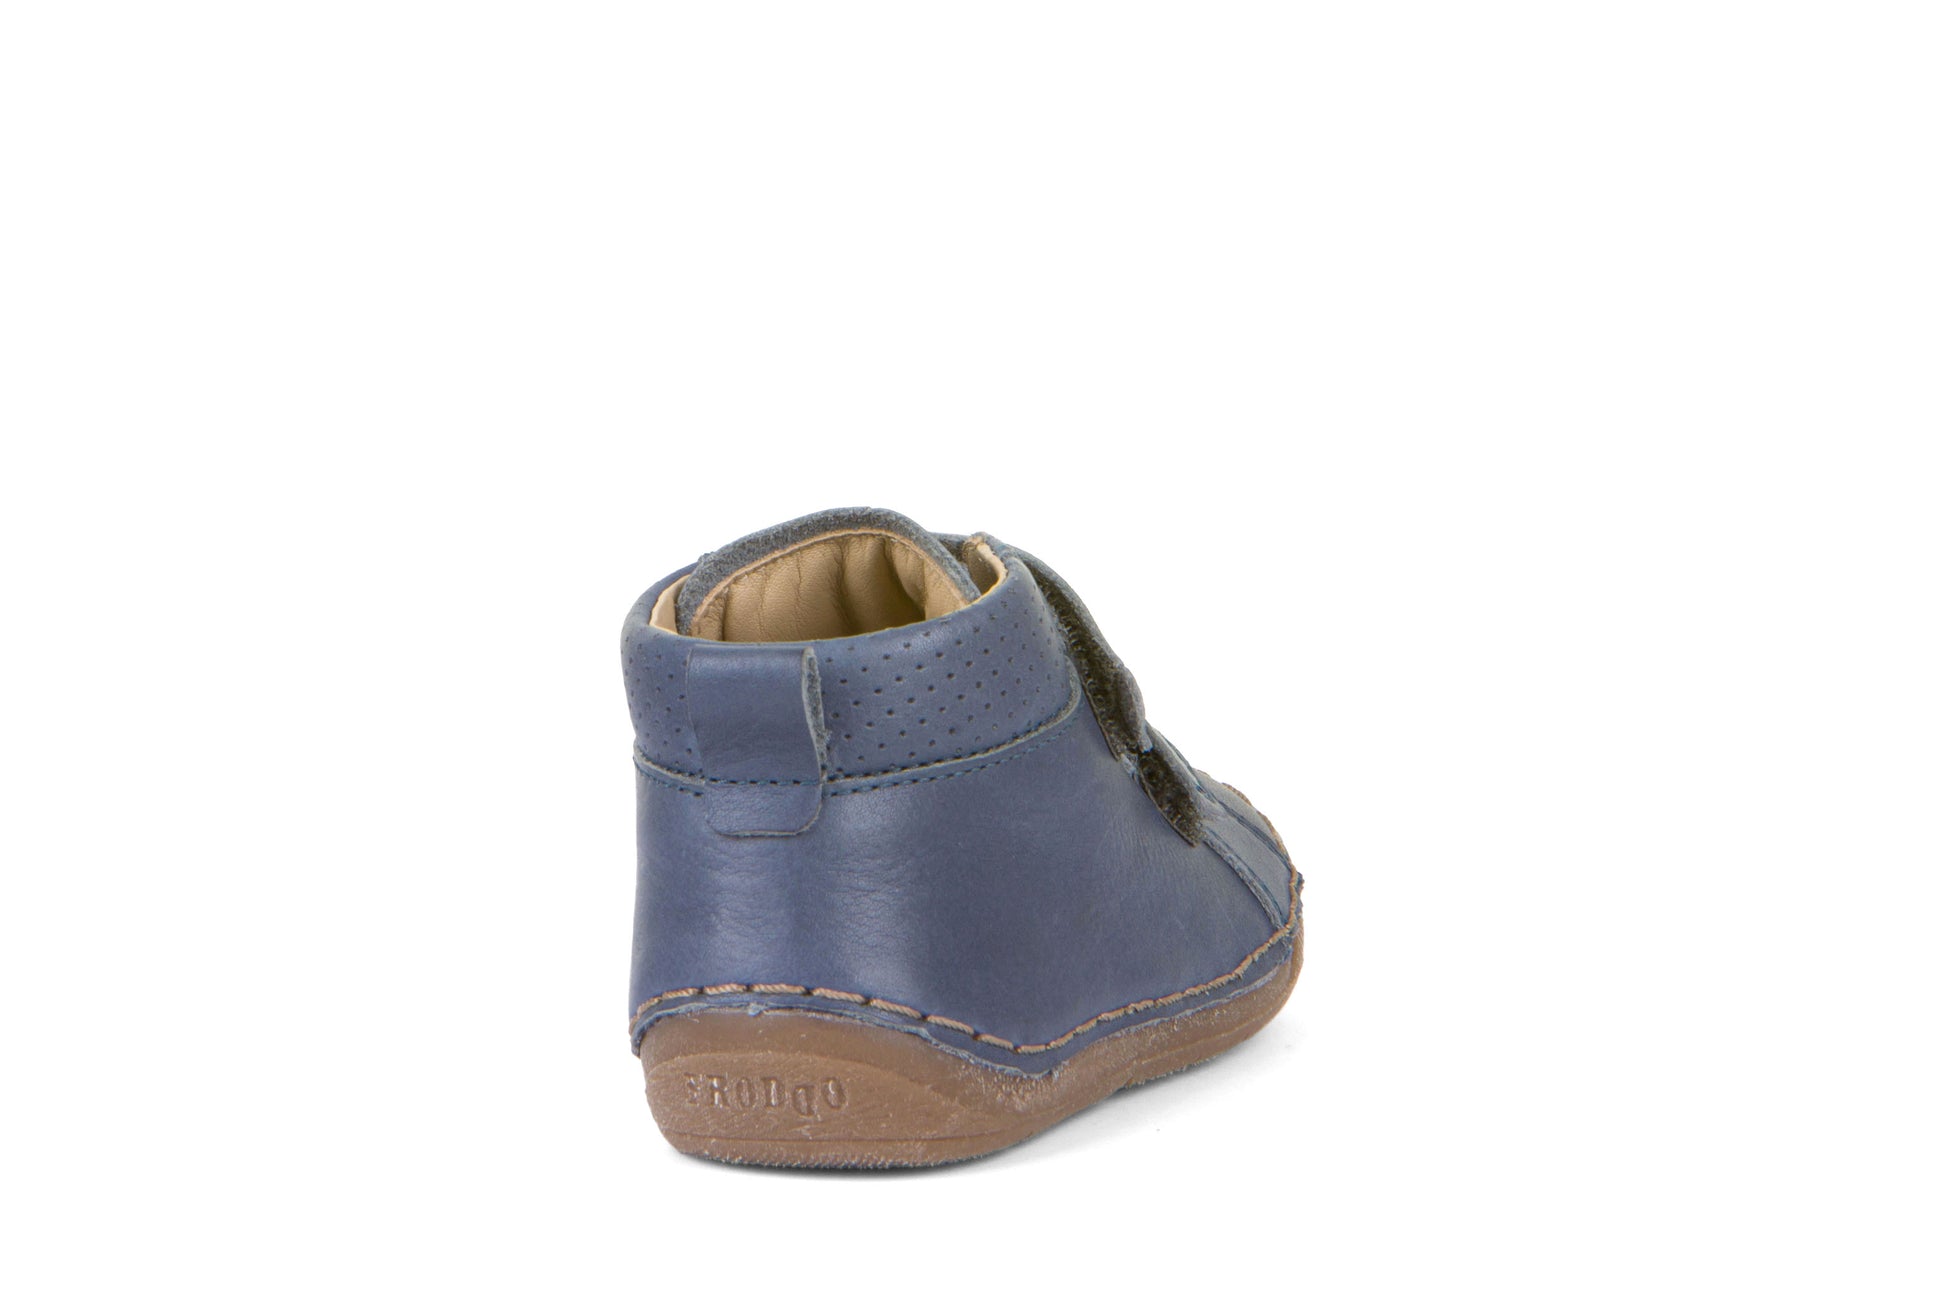 A boys boot by Froddo, style Paix Velcro G2130268-1 in Denim with double velcro fastening. Back view.